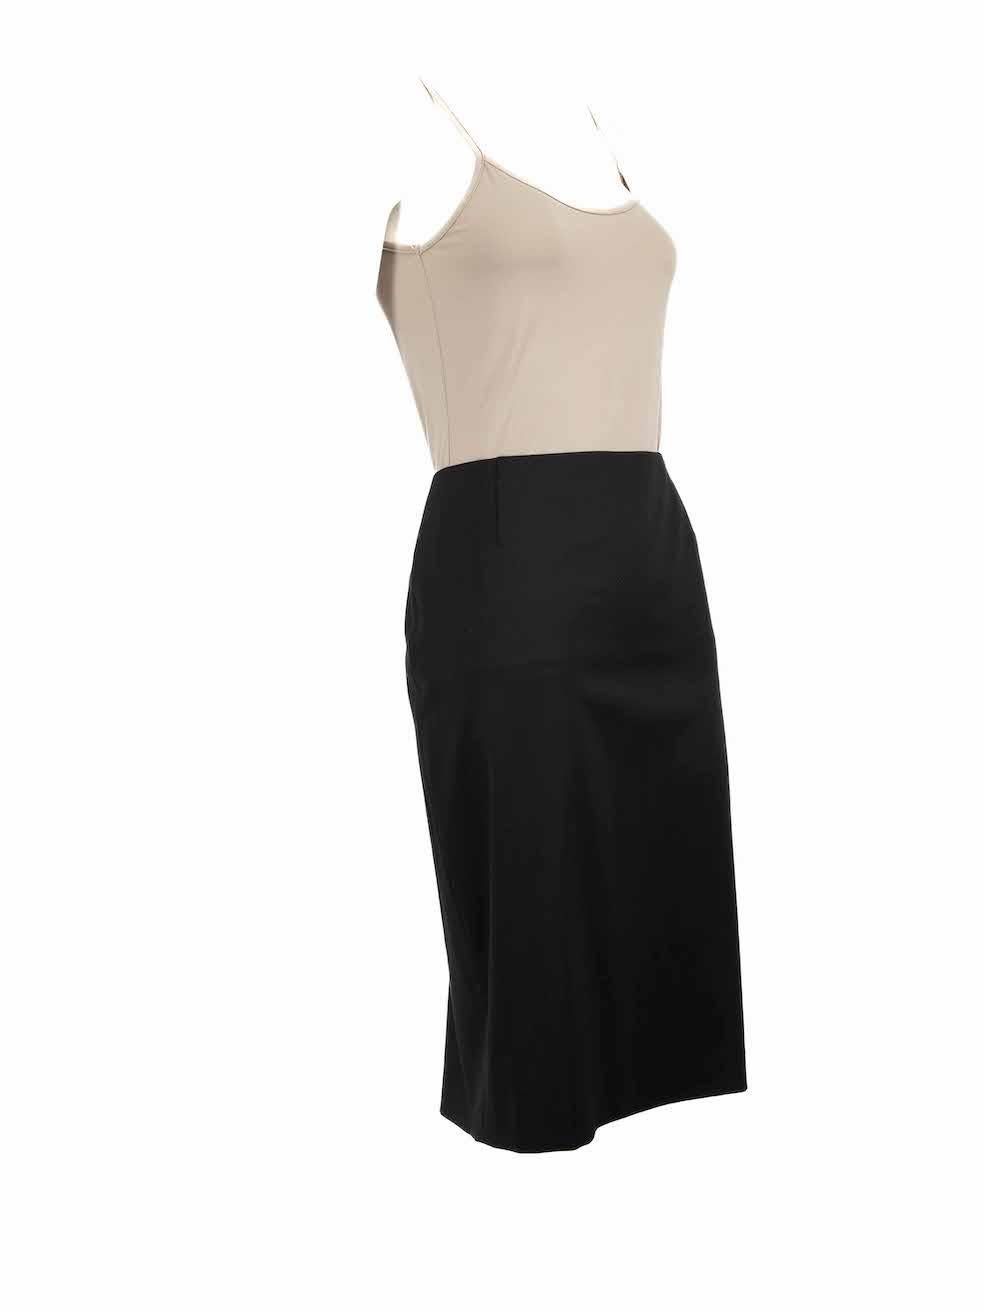 CONDITION is Very good. Hardly any visible wear to skirt is evident on this used Escada designer resale item.
 
 
 
 Details
 
 
 Black
 
 Wool
 
 Skirt
 
 Knee length
 
 Straight fit
 
 Back zip and button fastening
 
 
 
 
 
 Made in Slovenia
 
 
